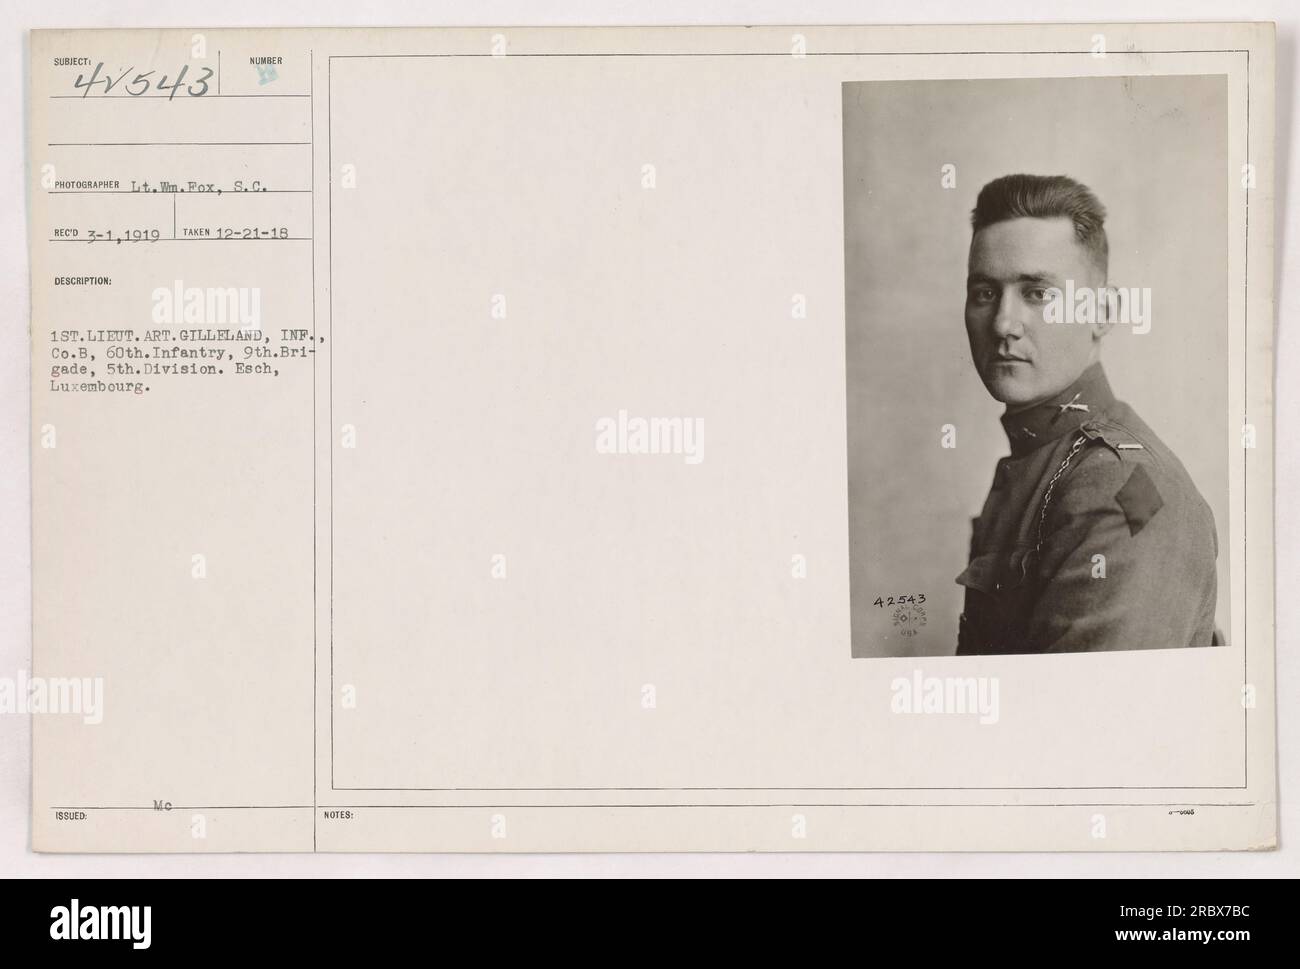 1st Lieutenant Art Gilleland of Co. B, 60th Infantry, 9th Brigade, 5th Division captured in a photograph taken on December 21, 1918, in Esch, Luxembourg by Lieutenant William Pox, S.C. This photo is labeled 111-SC-42543. Stock Photo